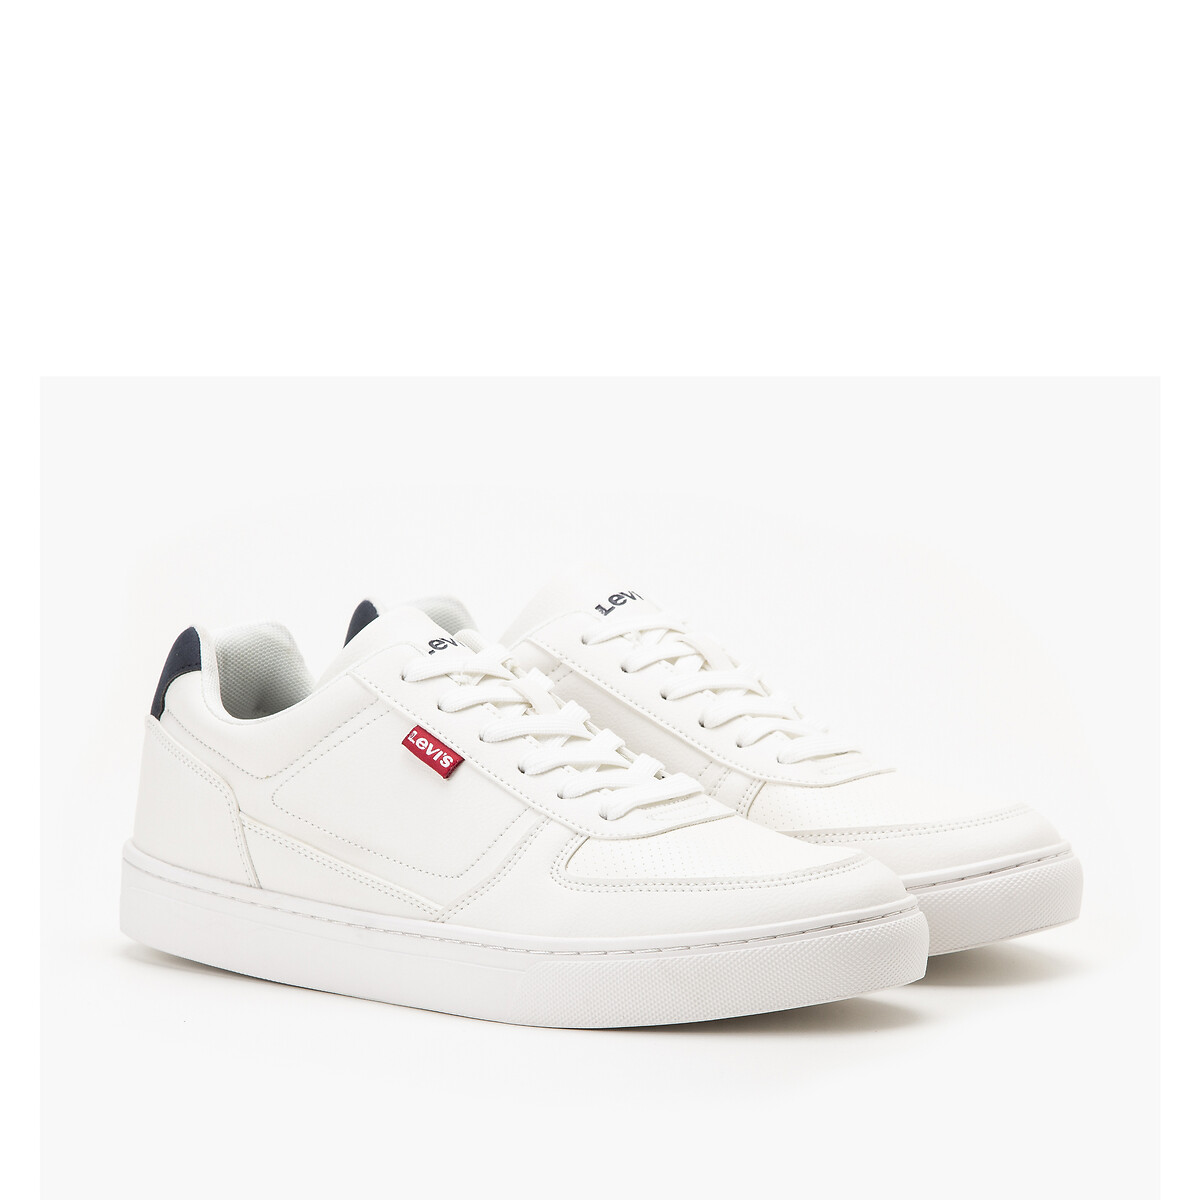 Buy Levis Men White Mid Top Sneakers - Casual Shoes for Men 1512621 | Myntra